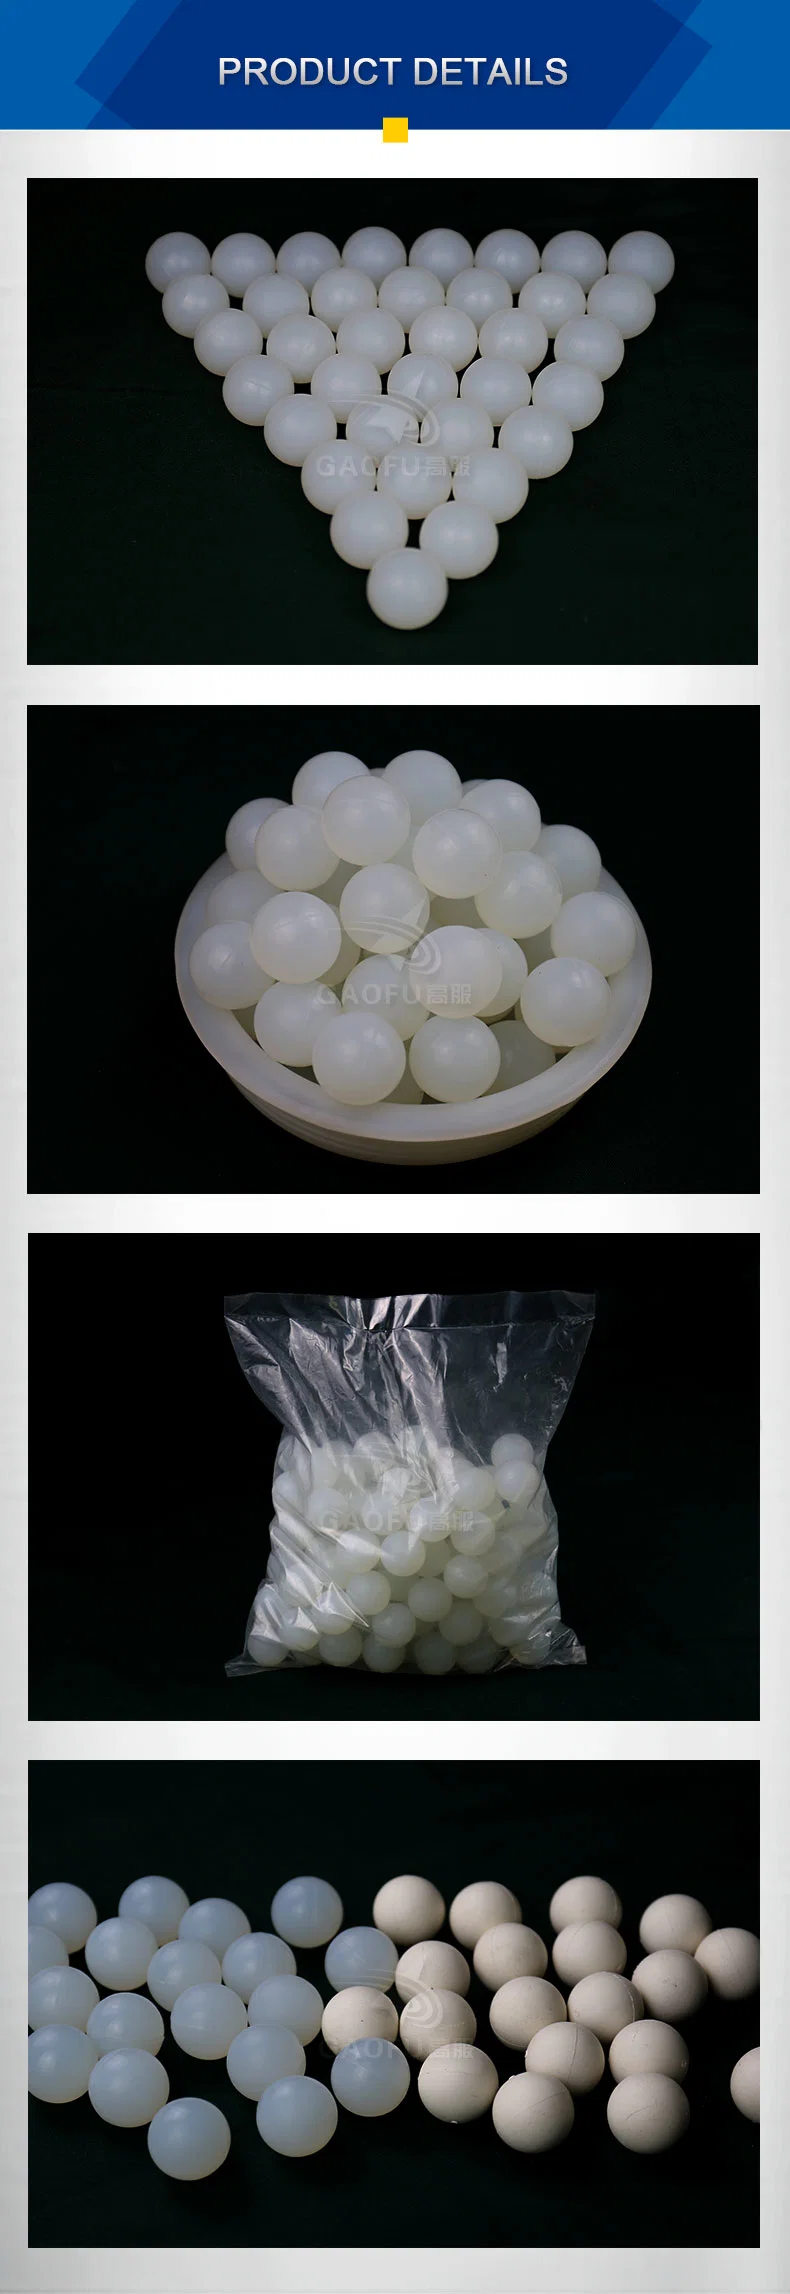 Gaofu Hot Selling Vibrating Screen Accessories Cleaning Rubber Bouncing Ball